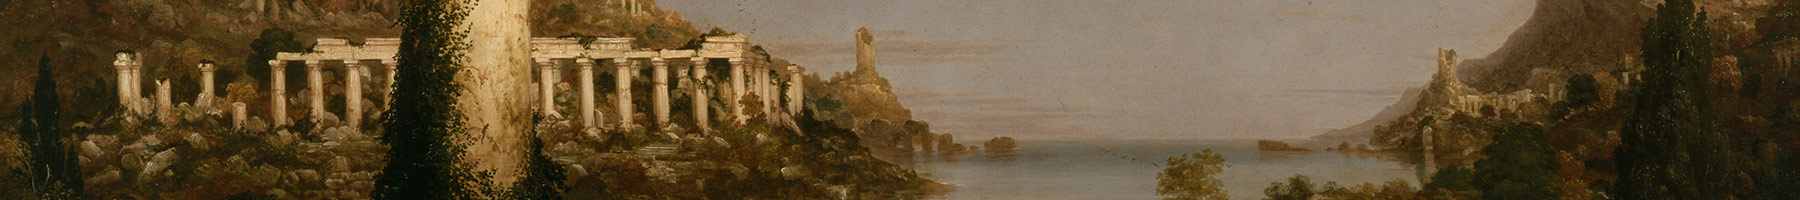 painting of the ruins of an empire